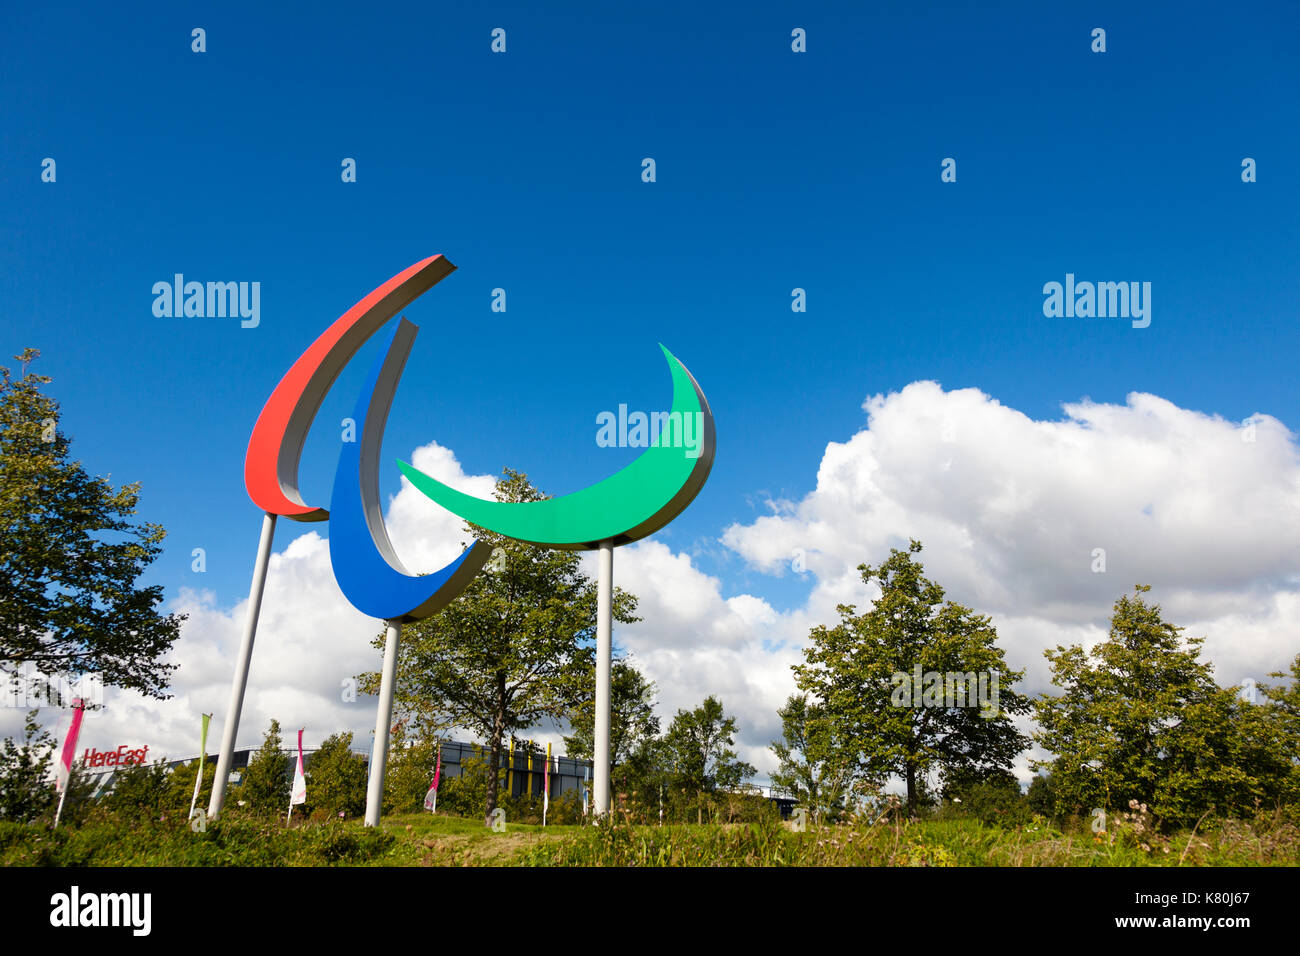 Paralympic Games logo at the Queen Elizabeth Olympic Park, London, UK. Stock Photo